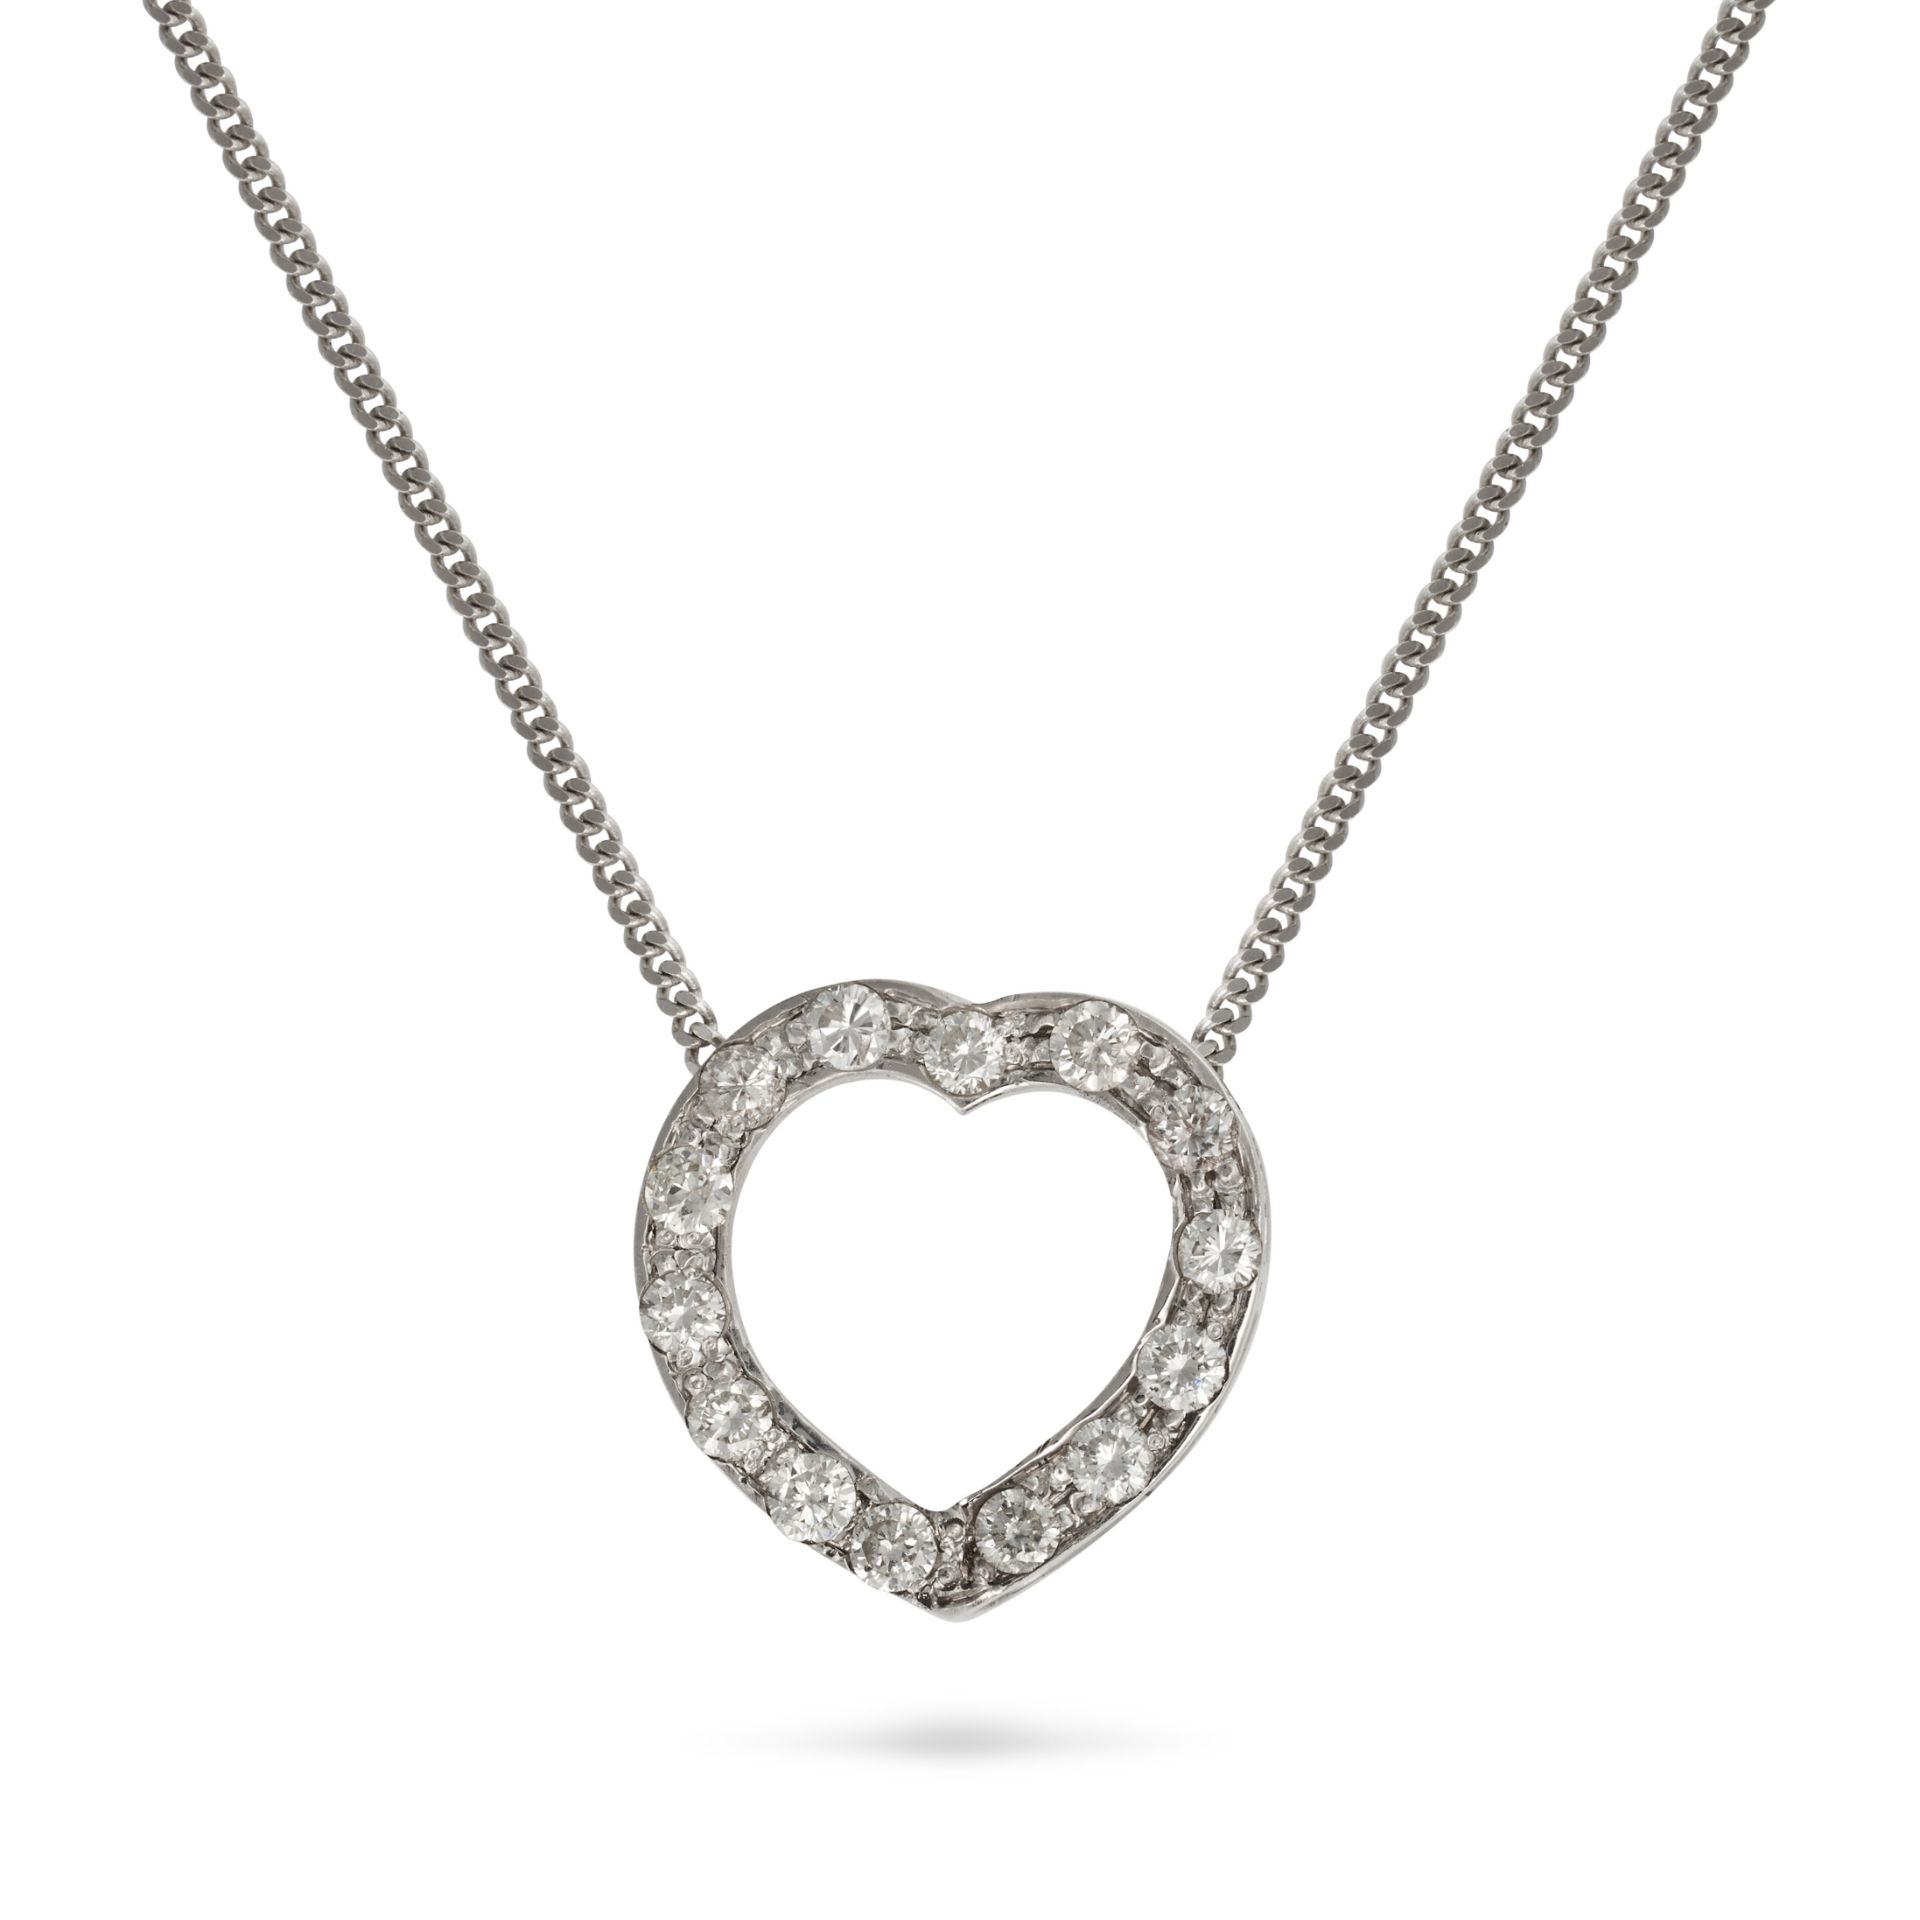 A DIAMOND HEART PENDANT NECKLACE in white gold, the pendant designed as a heart set with round br...